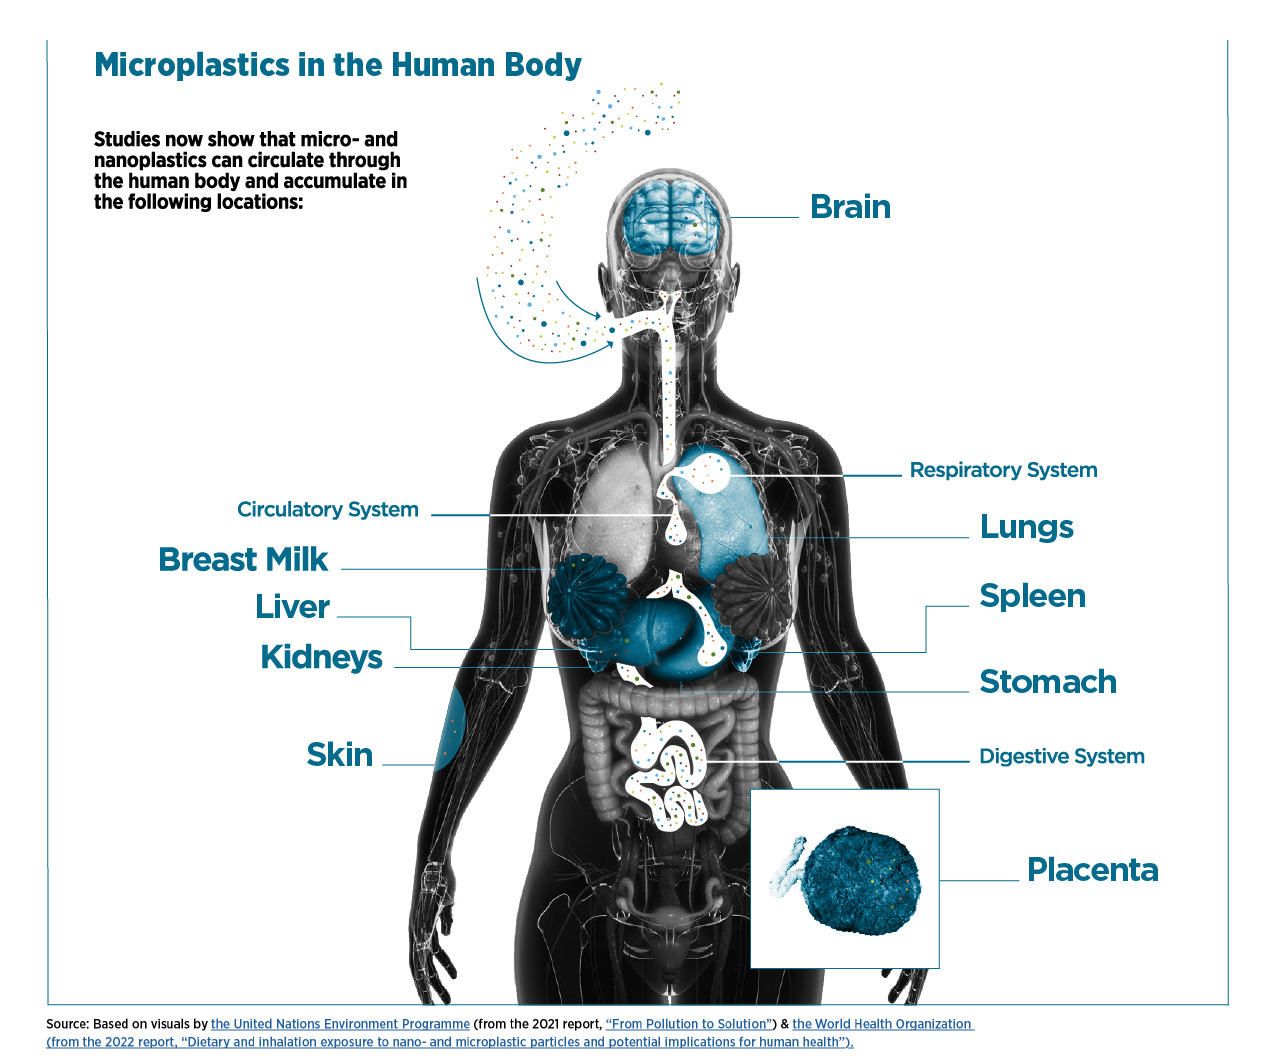 Infographic depicting microplastics in the human body.